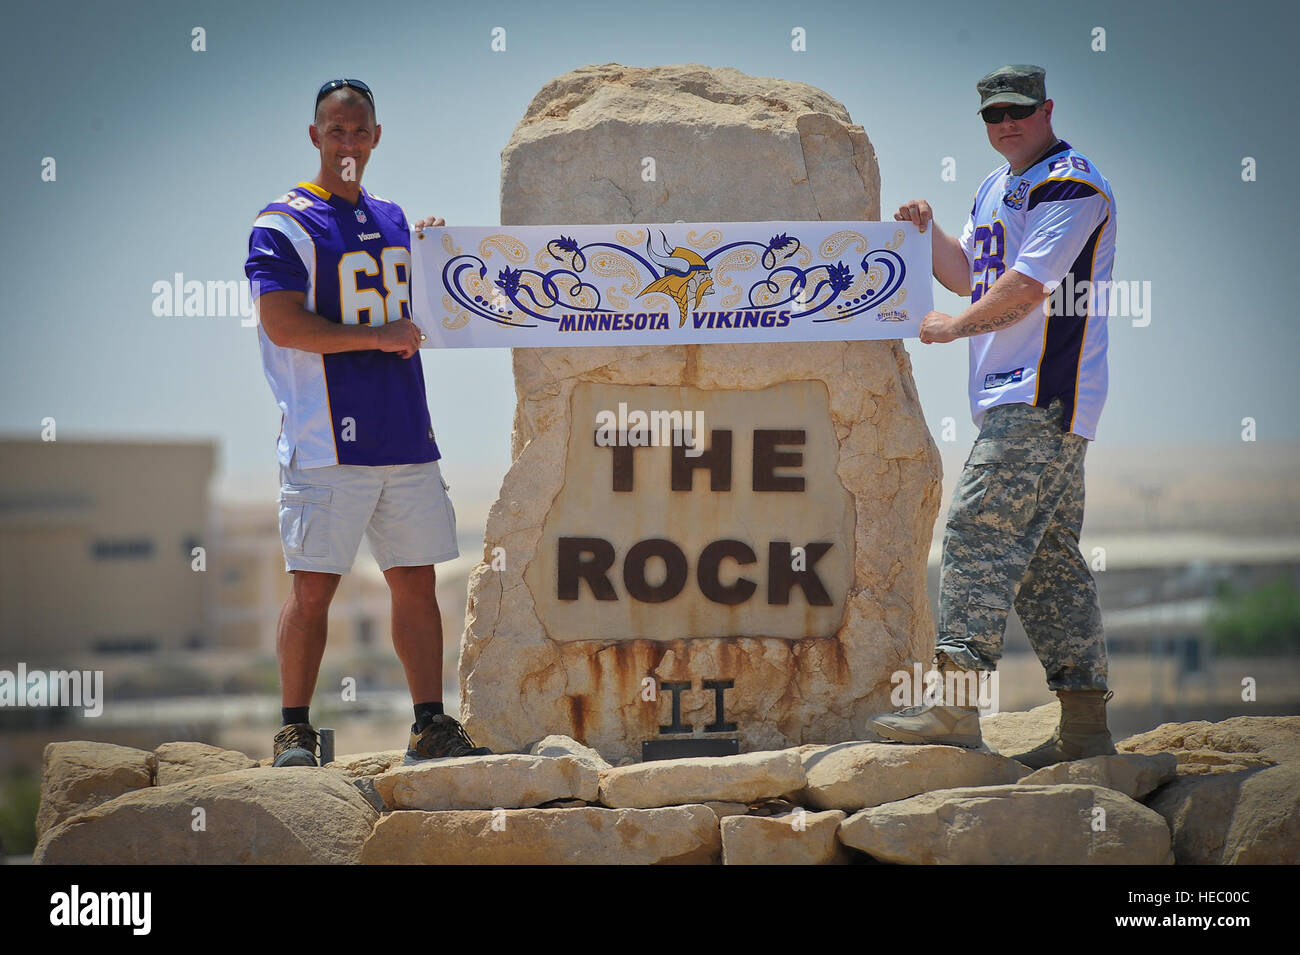 In anticipation of the upcoming NFL regular season kickoff, Minnesota Vikings fans and deployed U.S. soldiers Chief Warrant Officer 4 Joel Gordon and Spc. Lance Nielsen pose for a photo at the 386th Air Expeditionary Wing's 'Rock' monument proudly wearing their Vikings jerseys, Sunday, Aug. 25, 2013. Gordon, a Dassel, Minn. native, is a C-12 pilot stationed with Detachment 51 at Joint Base Lewis-McChord. He currently lives in Washington state. Nielsen, a St. Paul, Minn., native, is an aviation operations specialist with Detachment 39 at Army Aviation Support Facility Number 1 of the Minnesota  Stock Photo